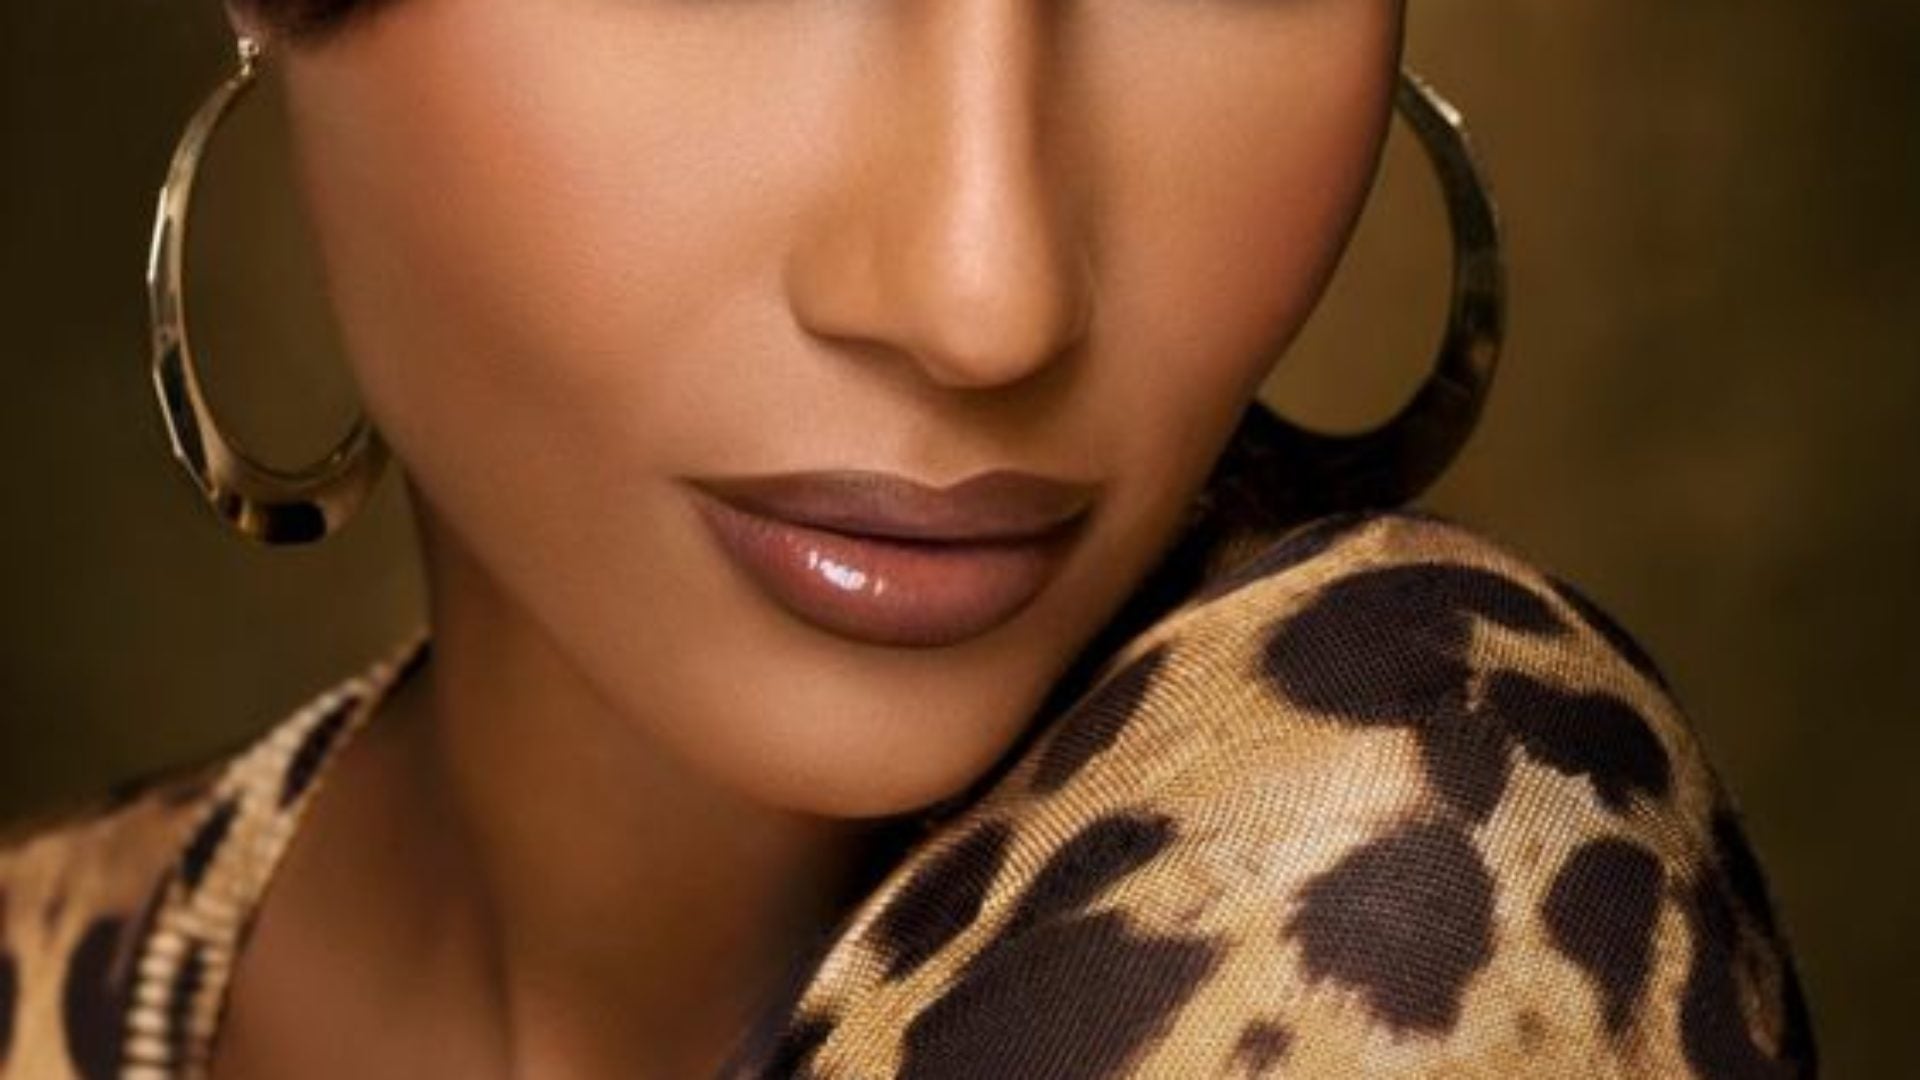 Iman Says She Wants Her Cosmetic Line To Be Her Legacy